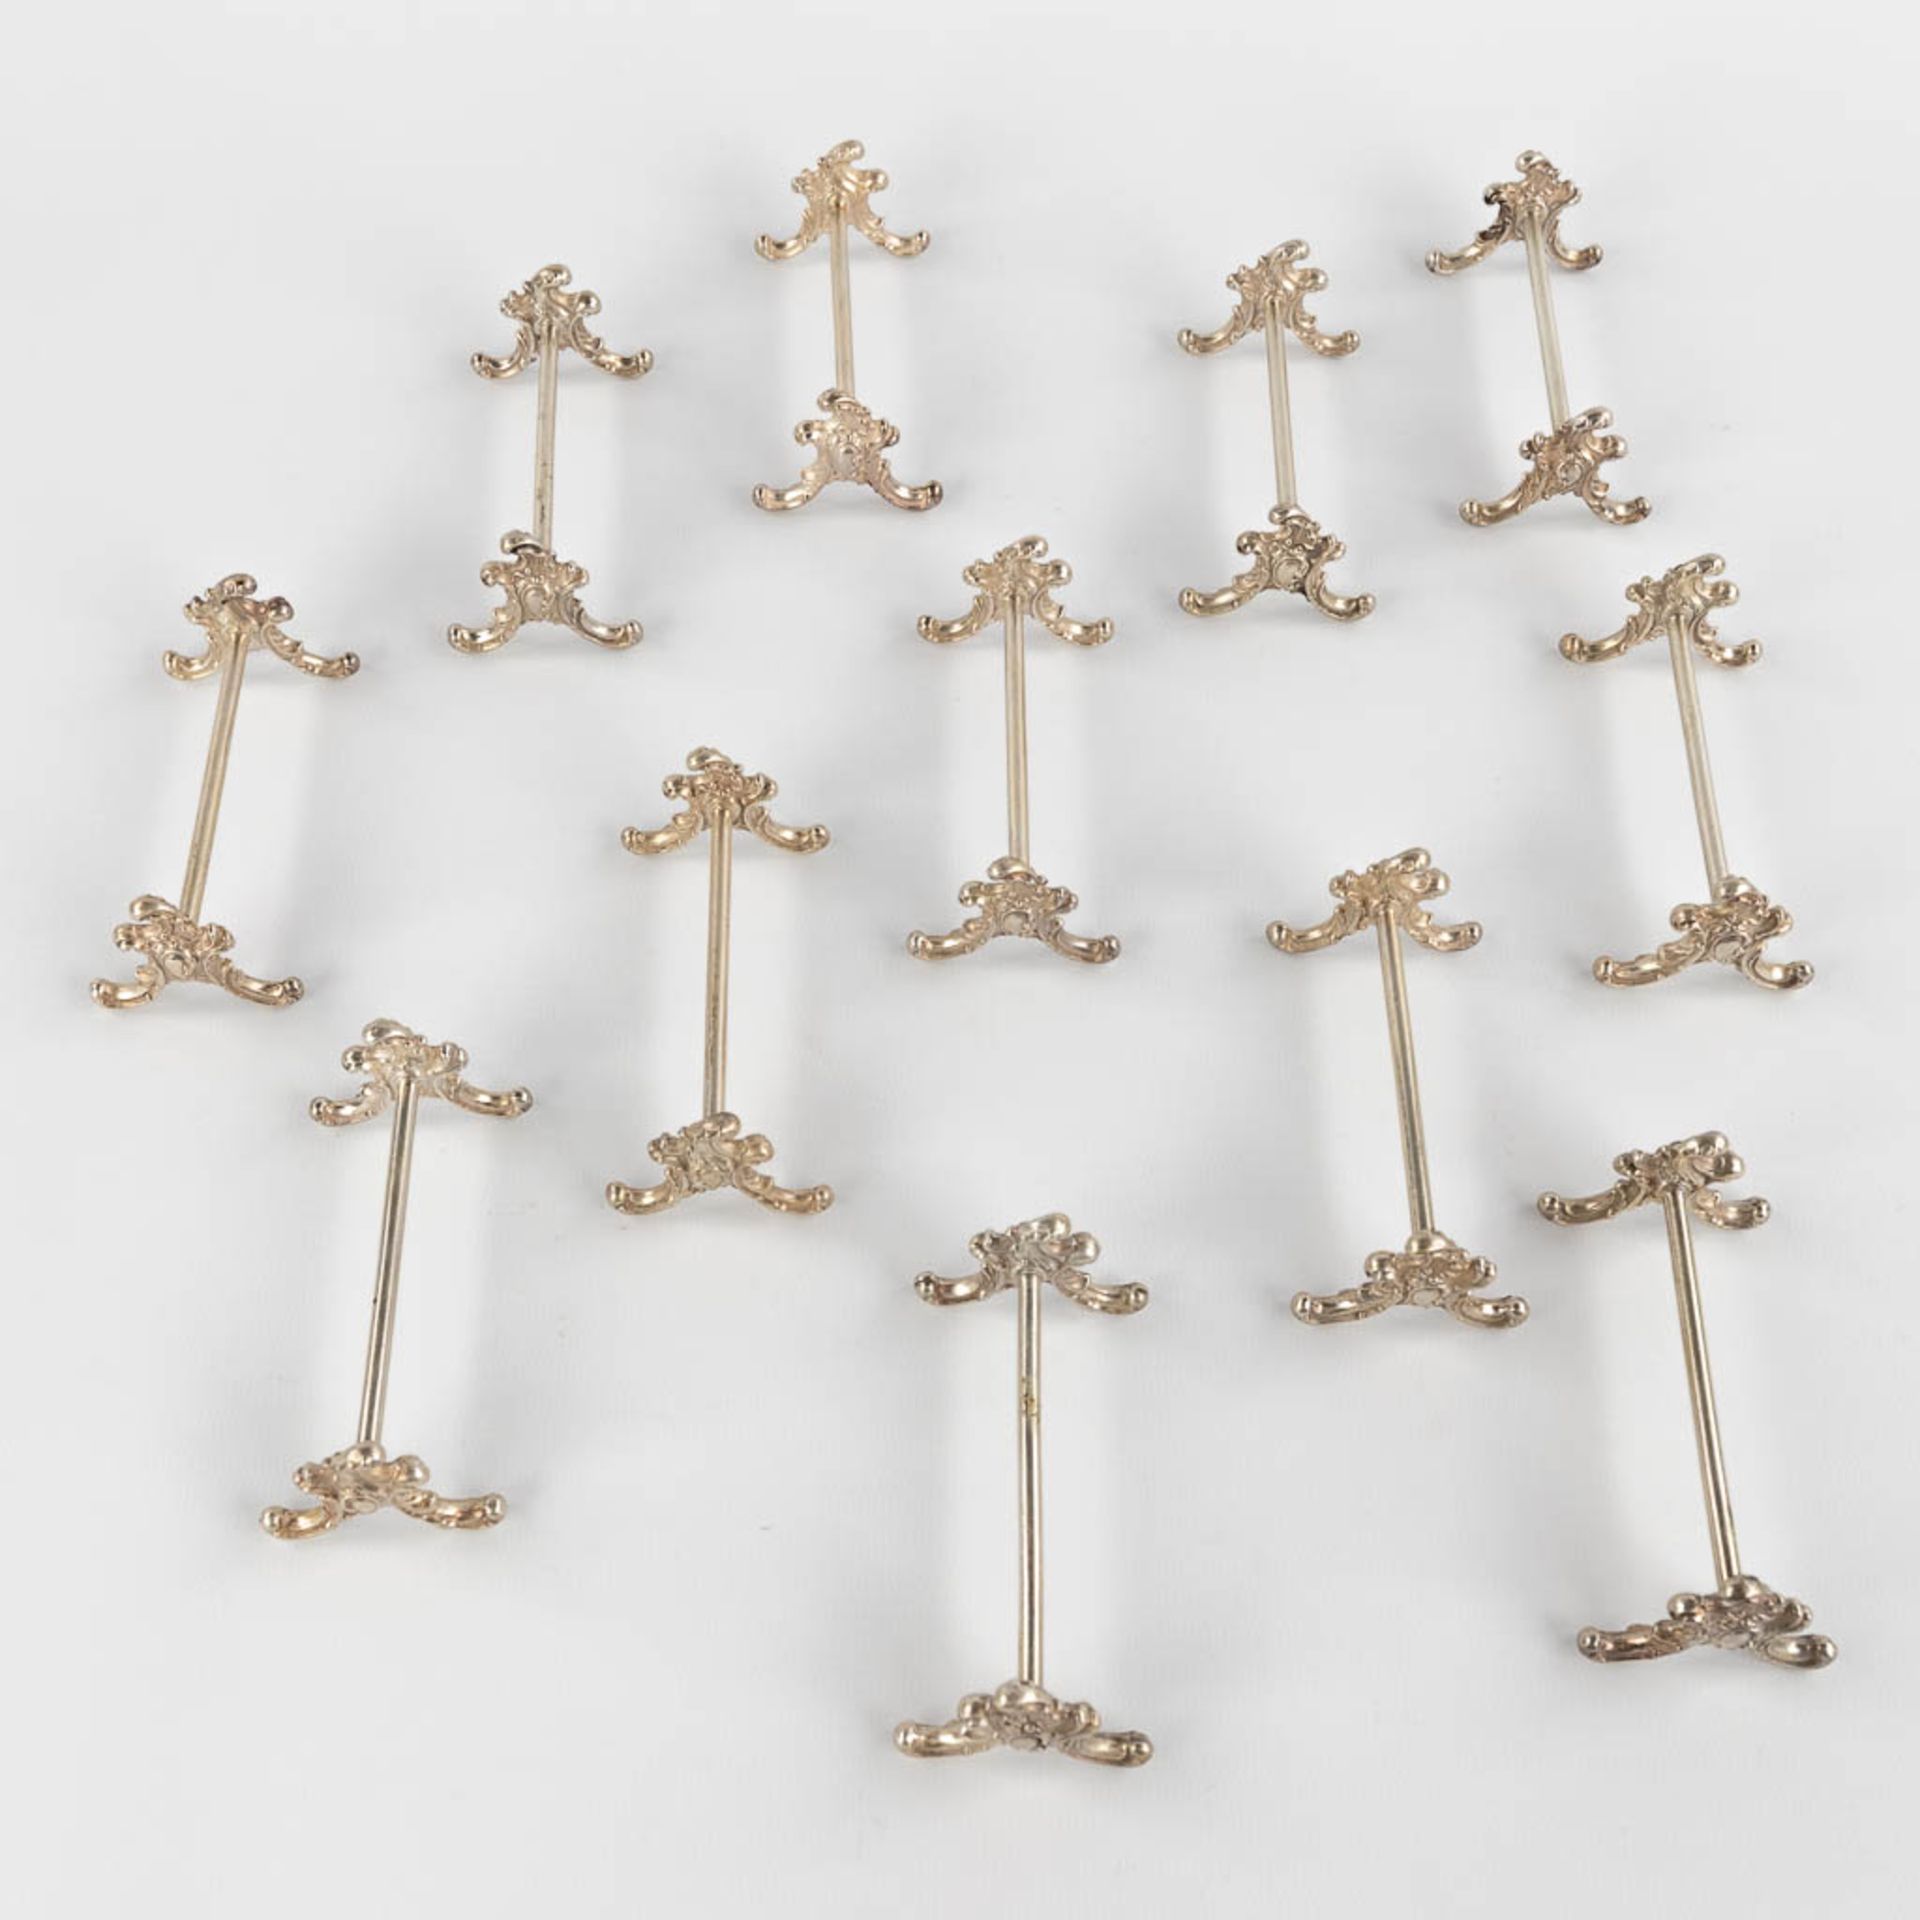 12 silver knife rests, Louis XV style, Germany. 324g. (D:9 x H:3,5 cm) - Image 3 of 9